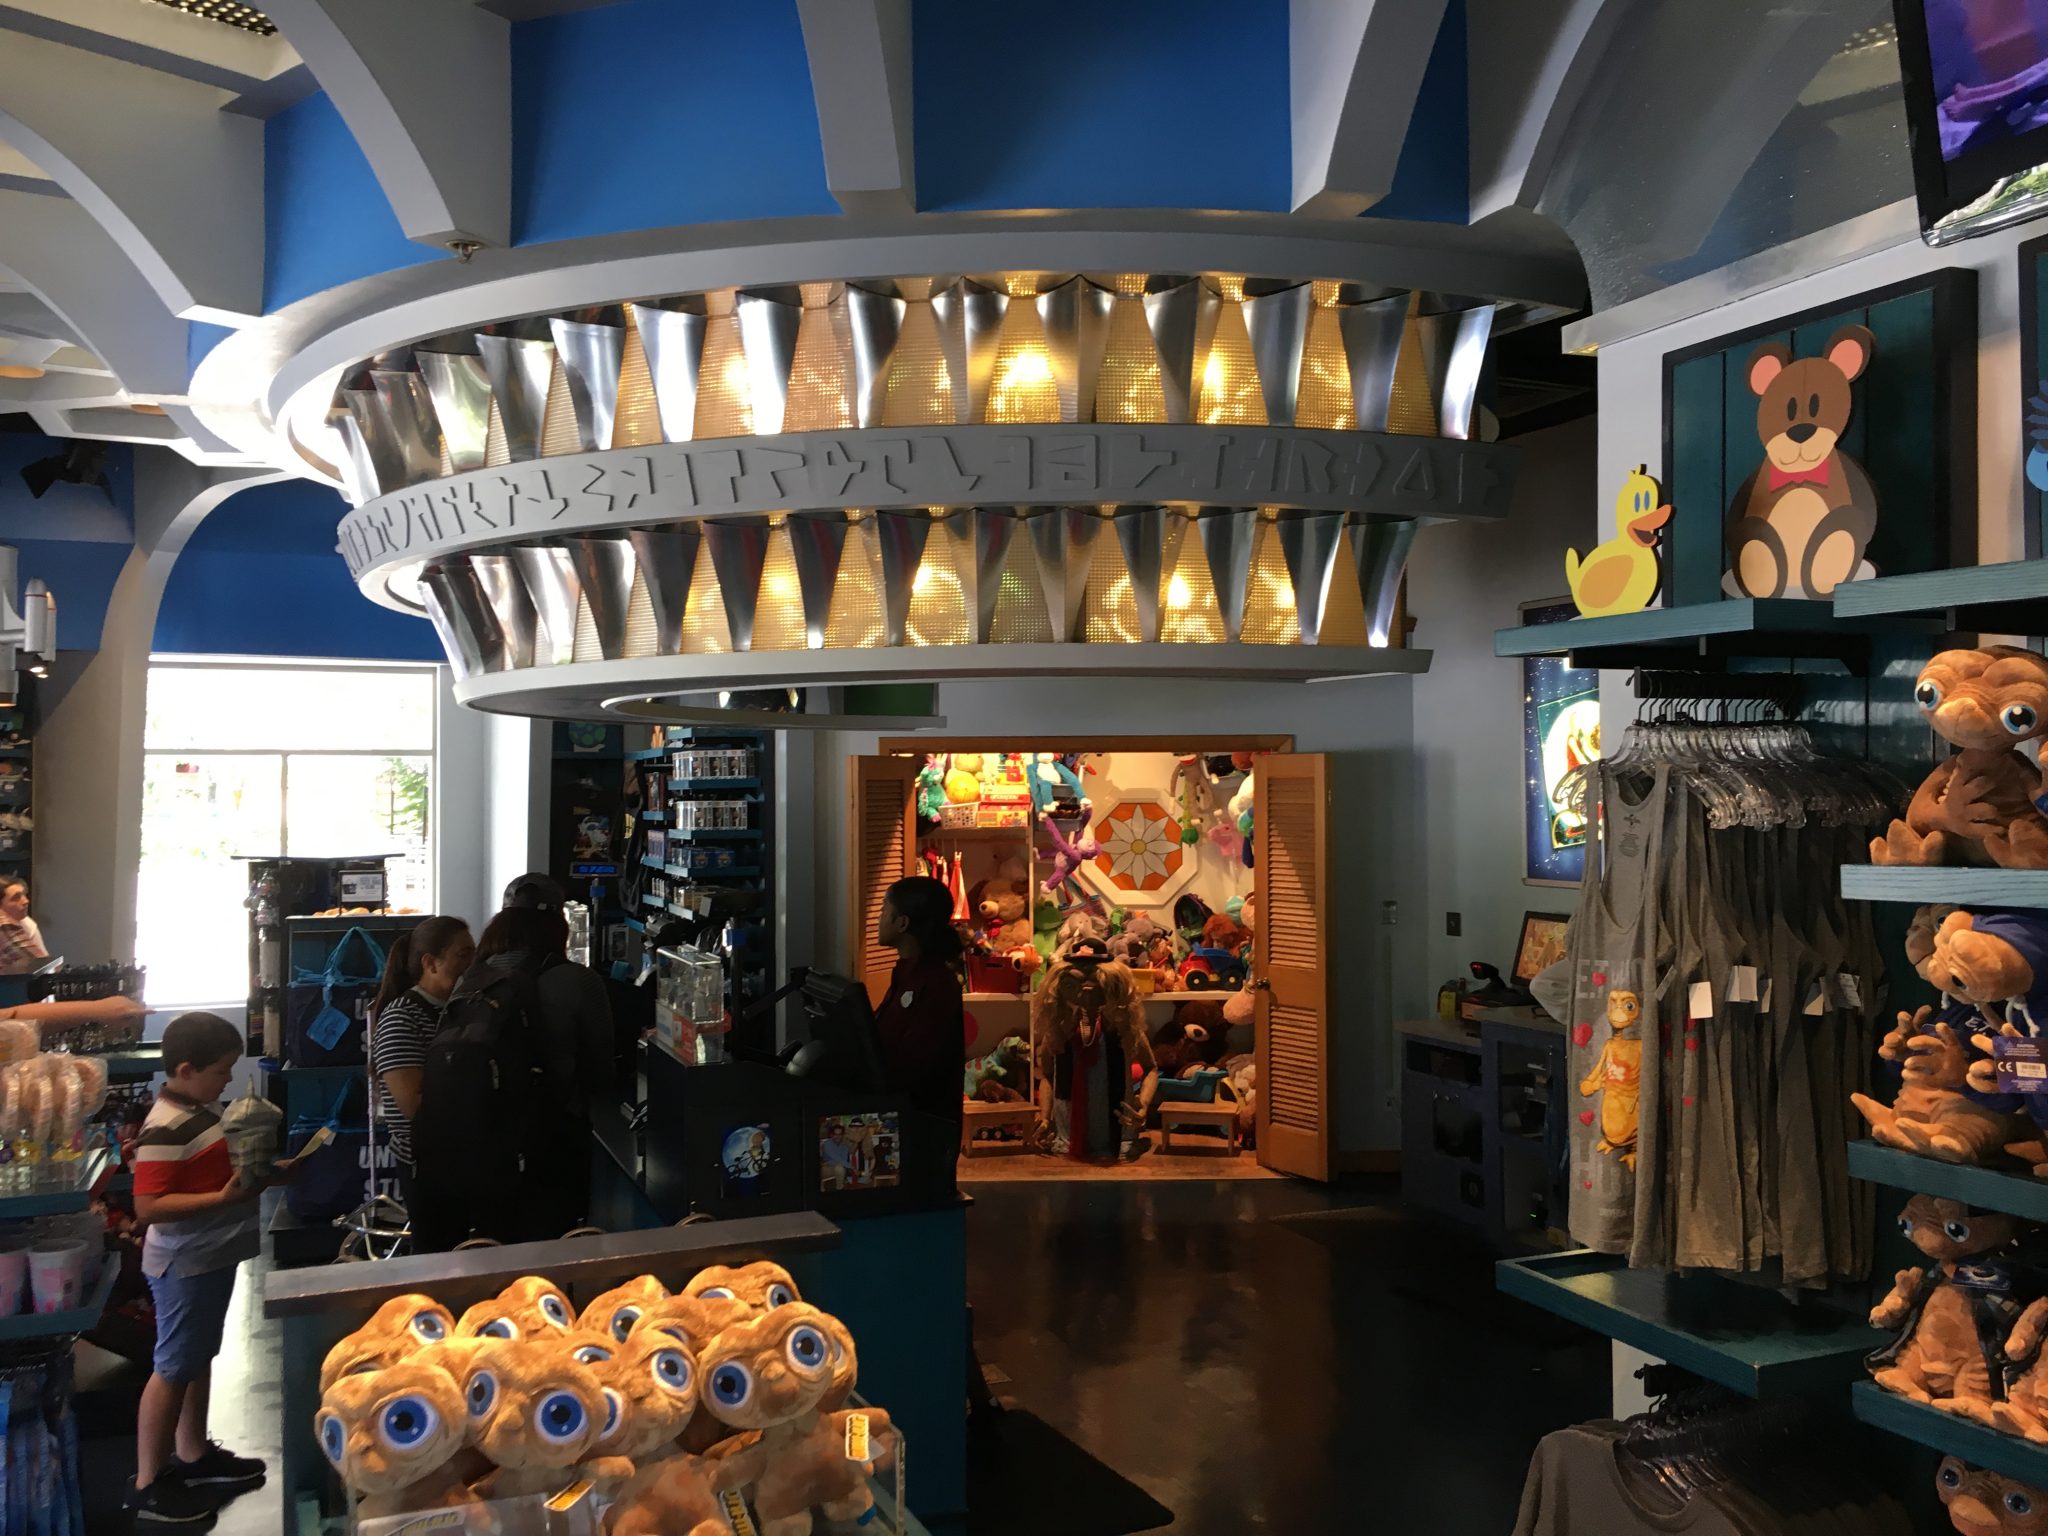 10 Facts About E.T. Adventure at Universal Studios Florida – Orlando